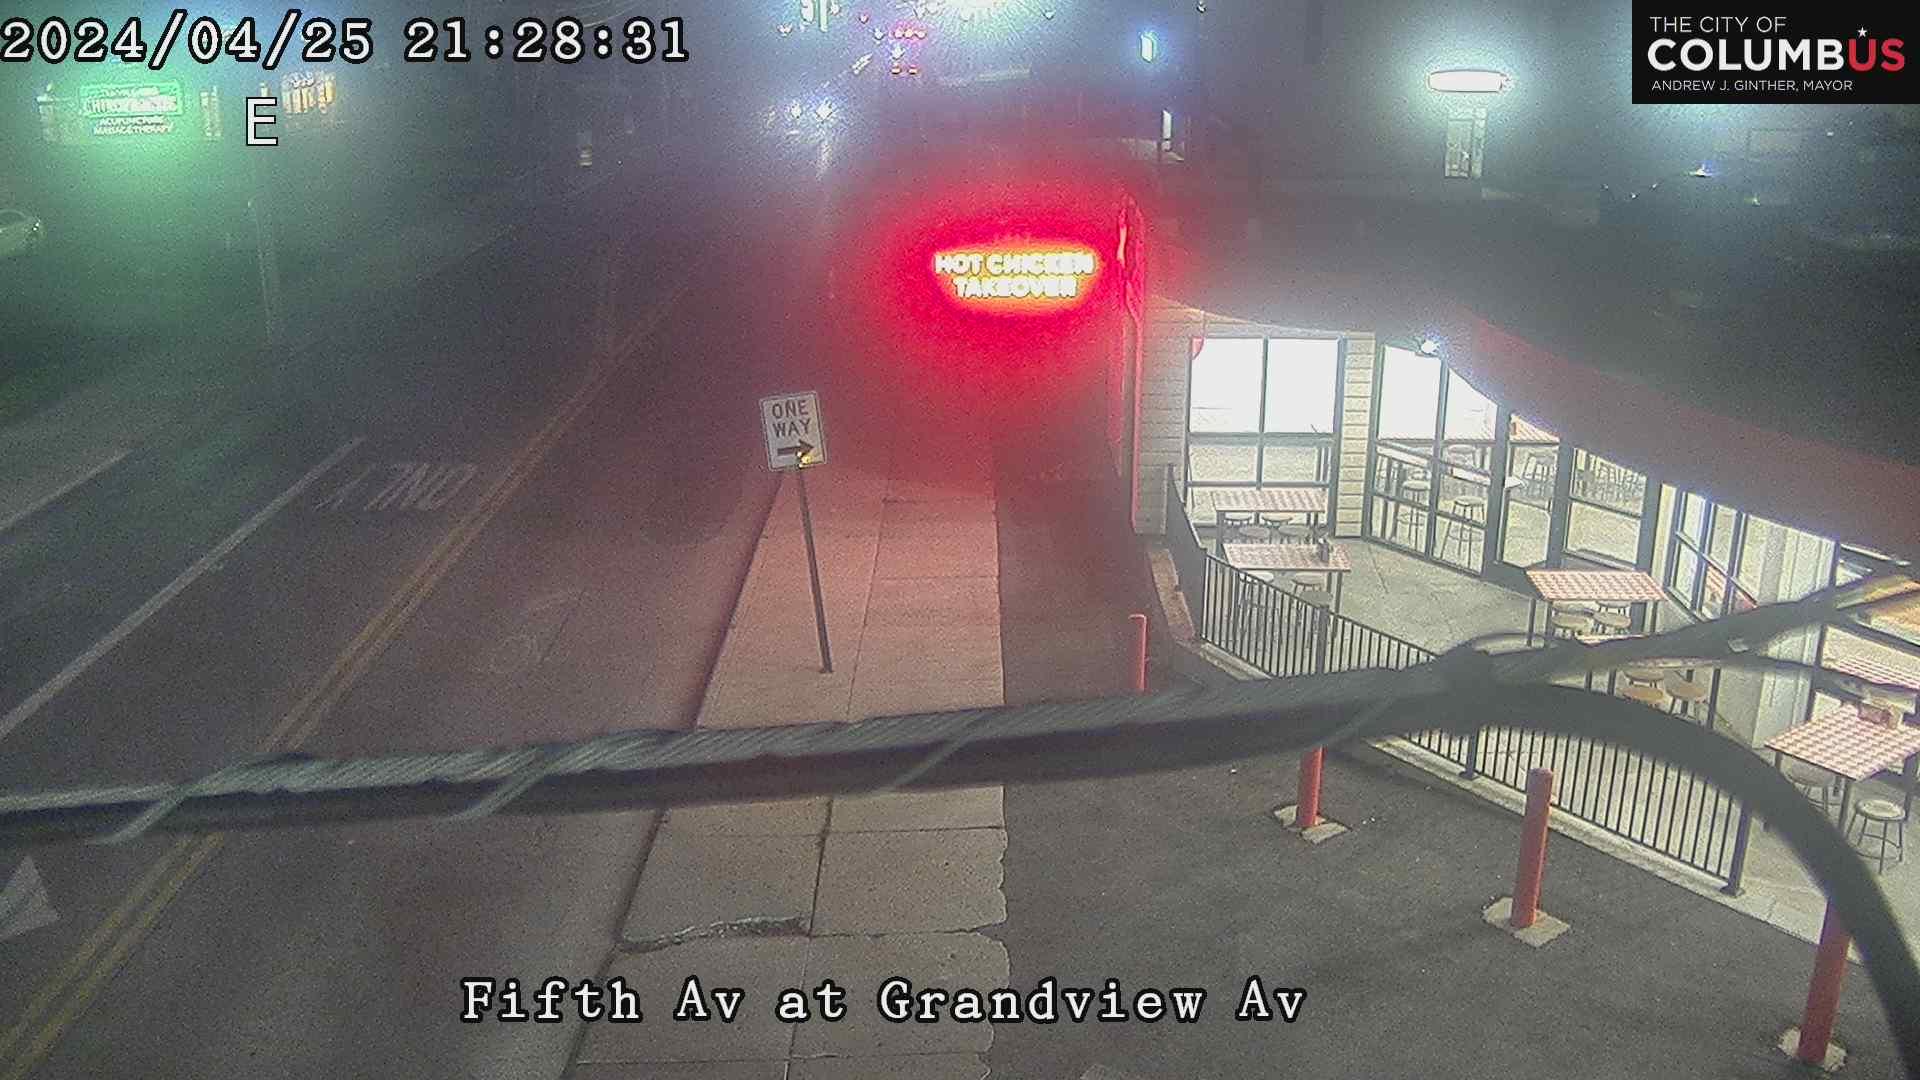 Fifth by Northwest: City of Columbus) Fifth Ave at Grandview Ave Traffic Camera